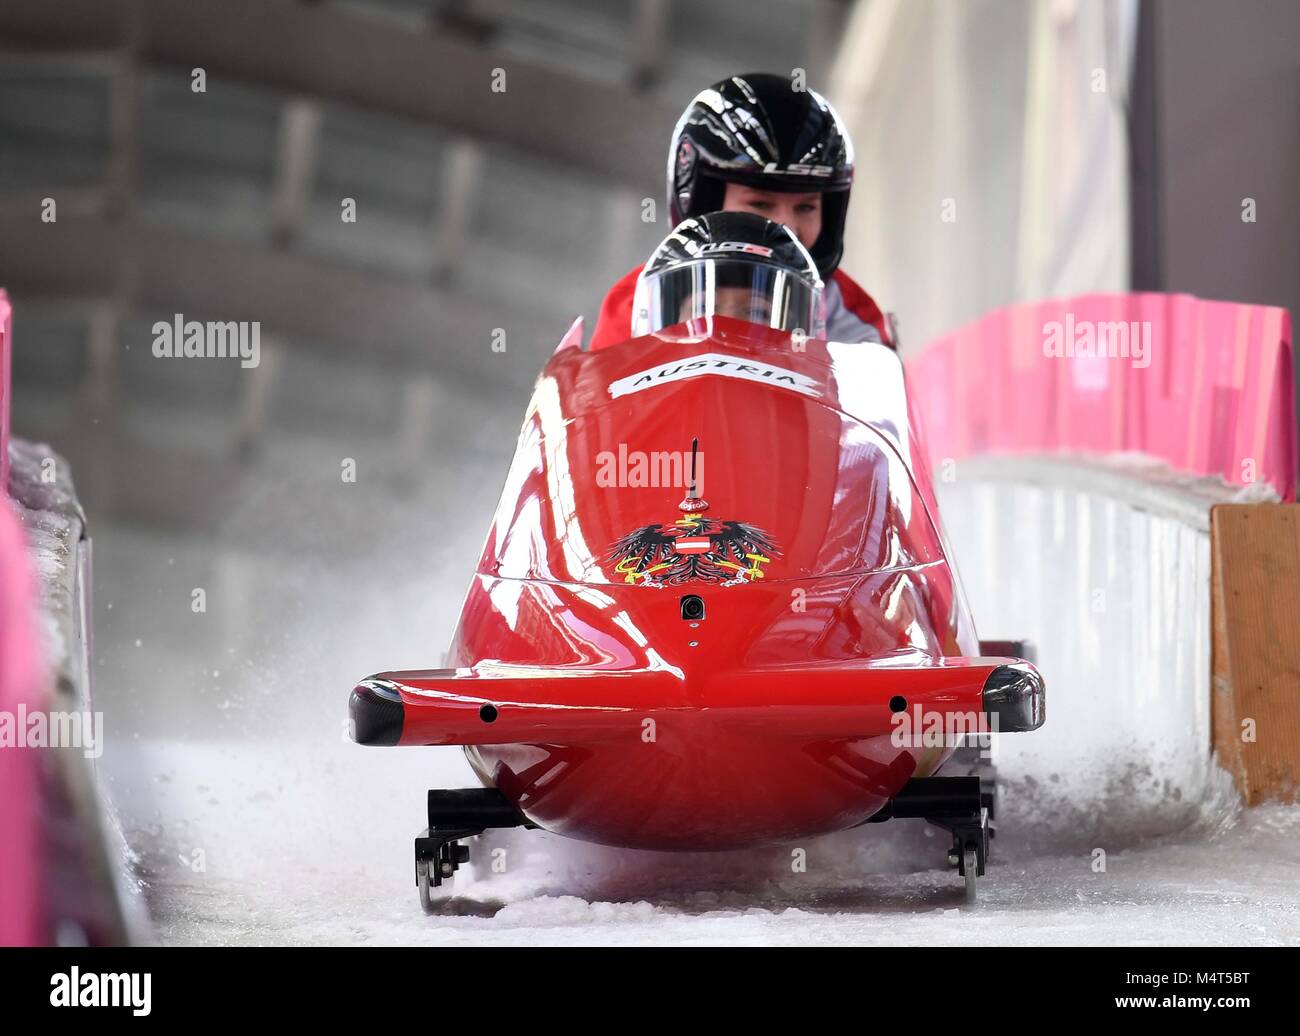 Christina Hengster (AUT) and Valerie Kleiser (AUT). Womens bobsleigh training. Alpensia sliding centre. Pyeongchang2018 winter Olympics. Alpensia. Republic of Korea. 17/02/2018. Credit: Sport In Pictures/Alamy Live News Stock Photo